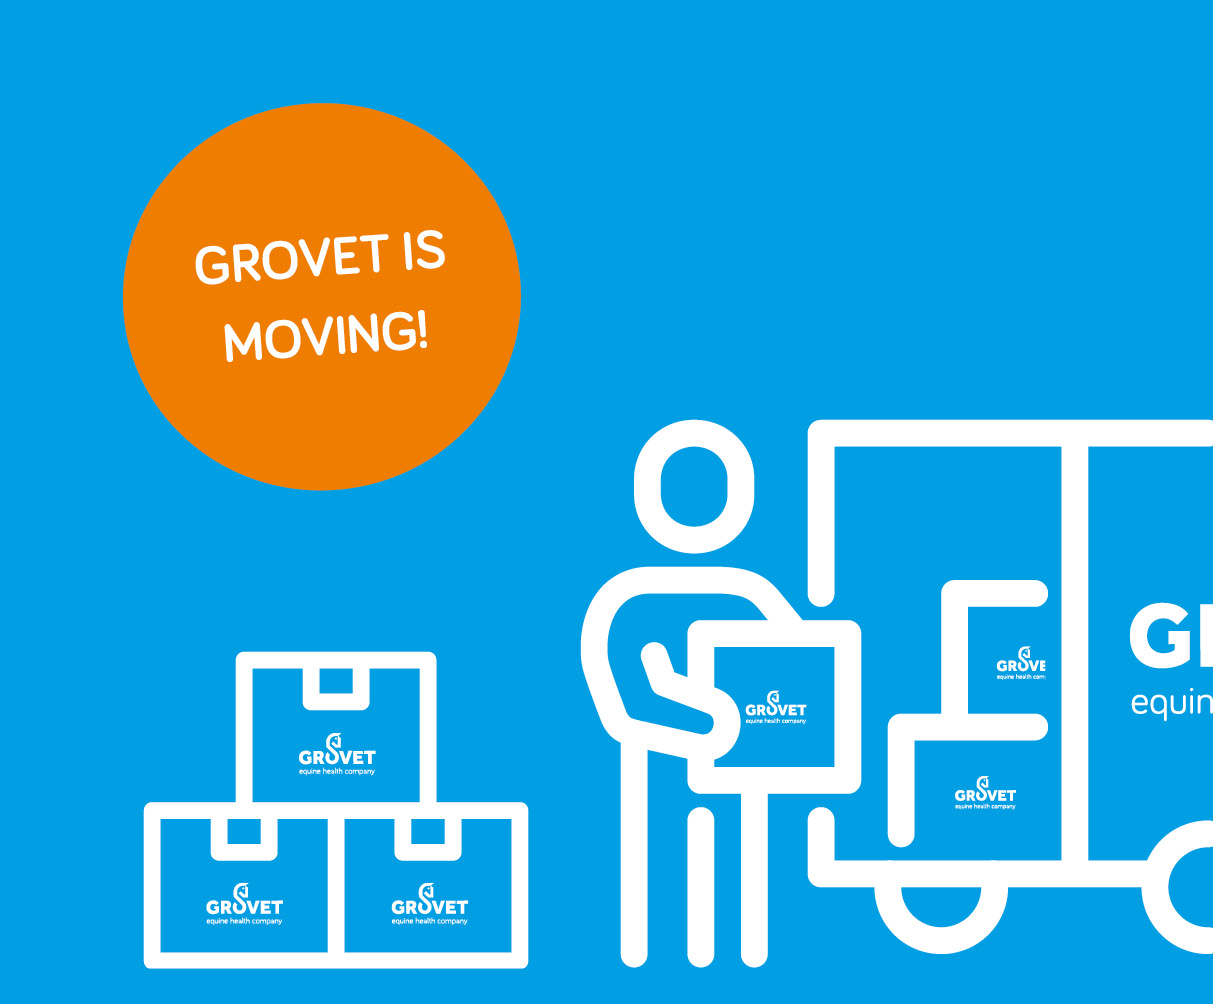 Grovet is moving!